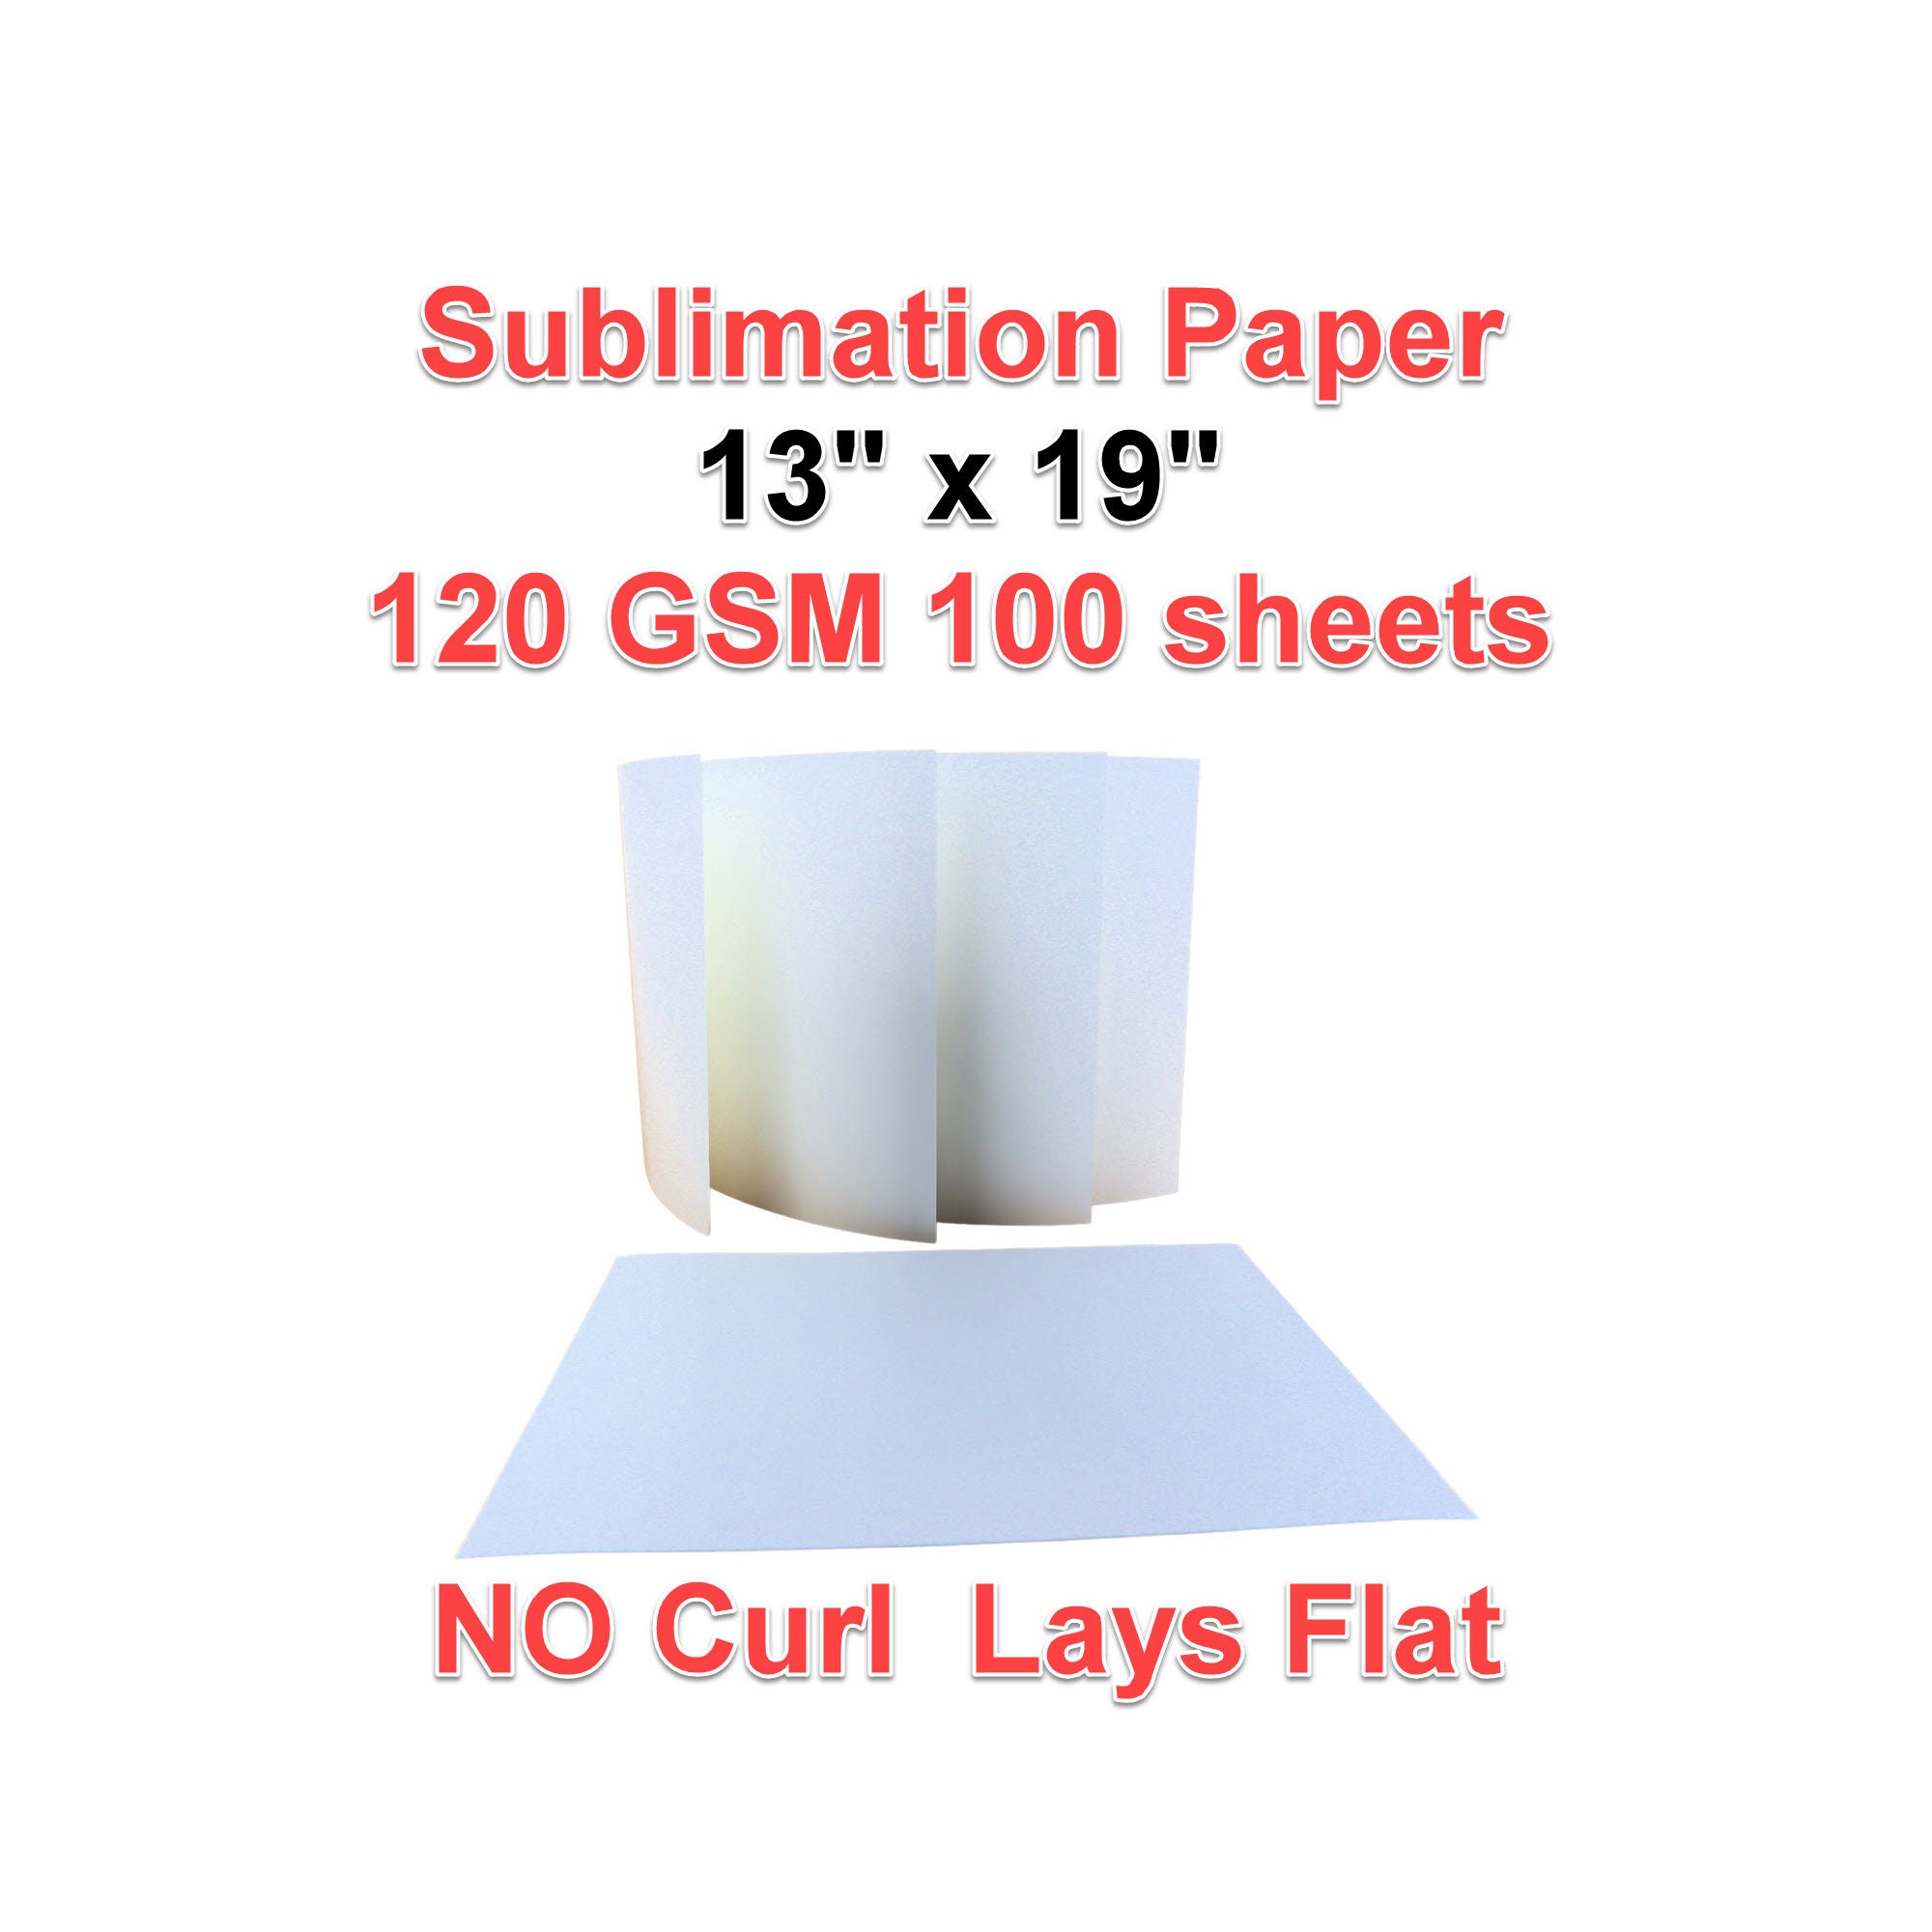 A-SUB Sublimation Paper 13x19 Inch 125gsm Used For EPSON ME Series,RICOH GX  Series And SAWGRASS Printers